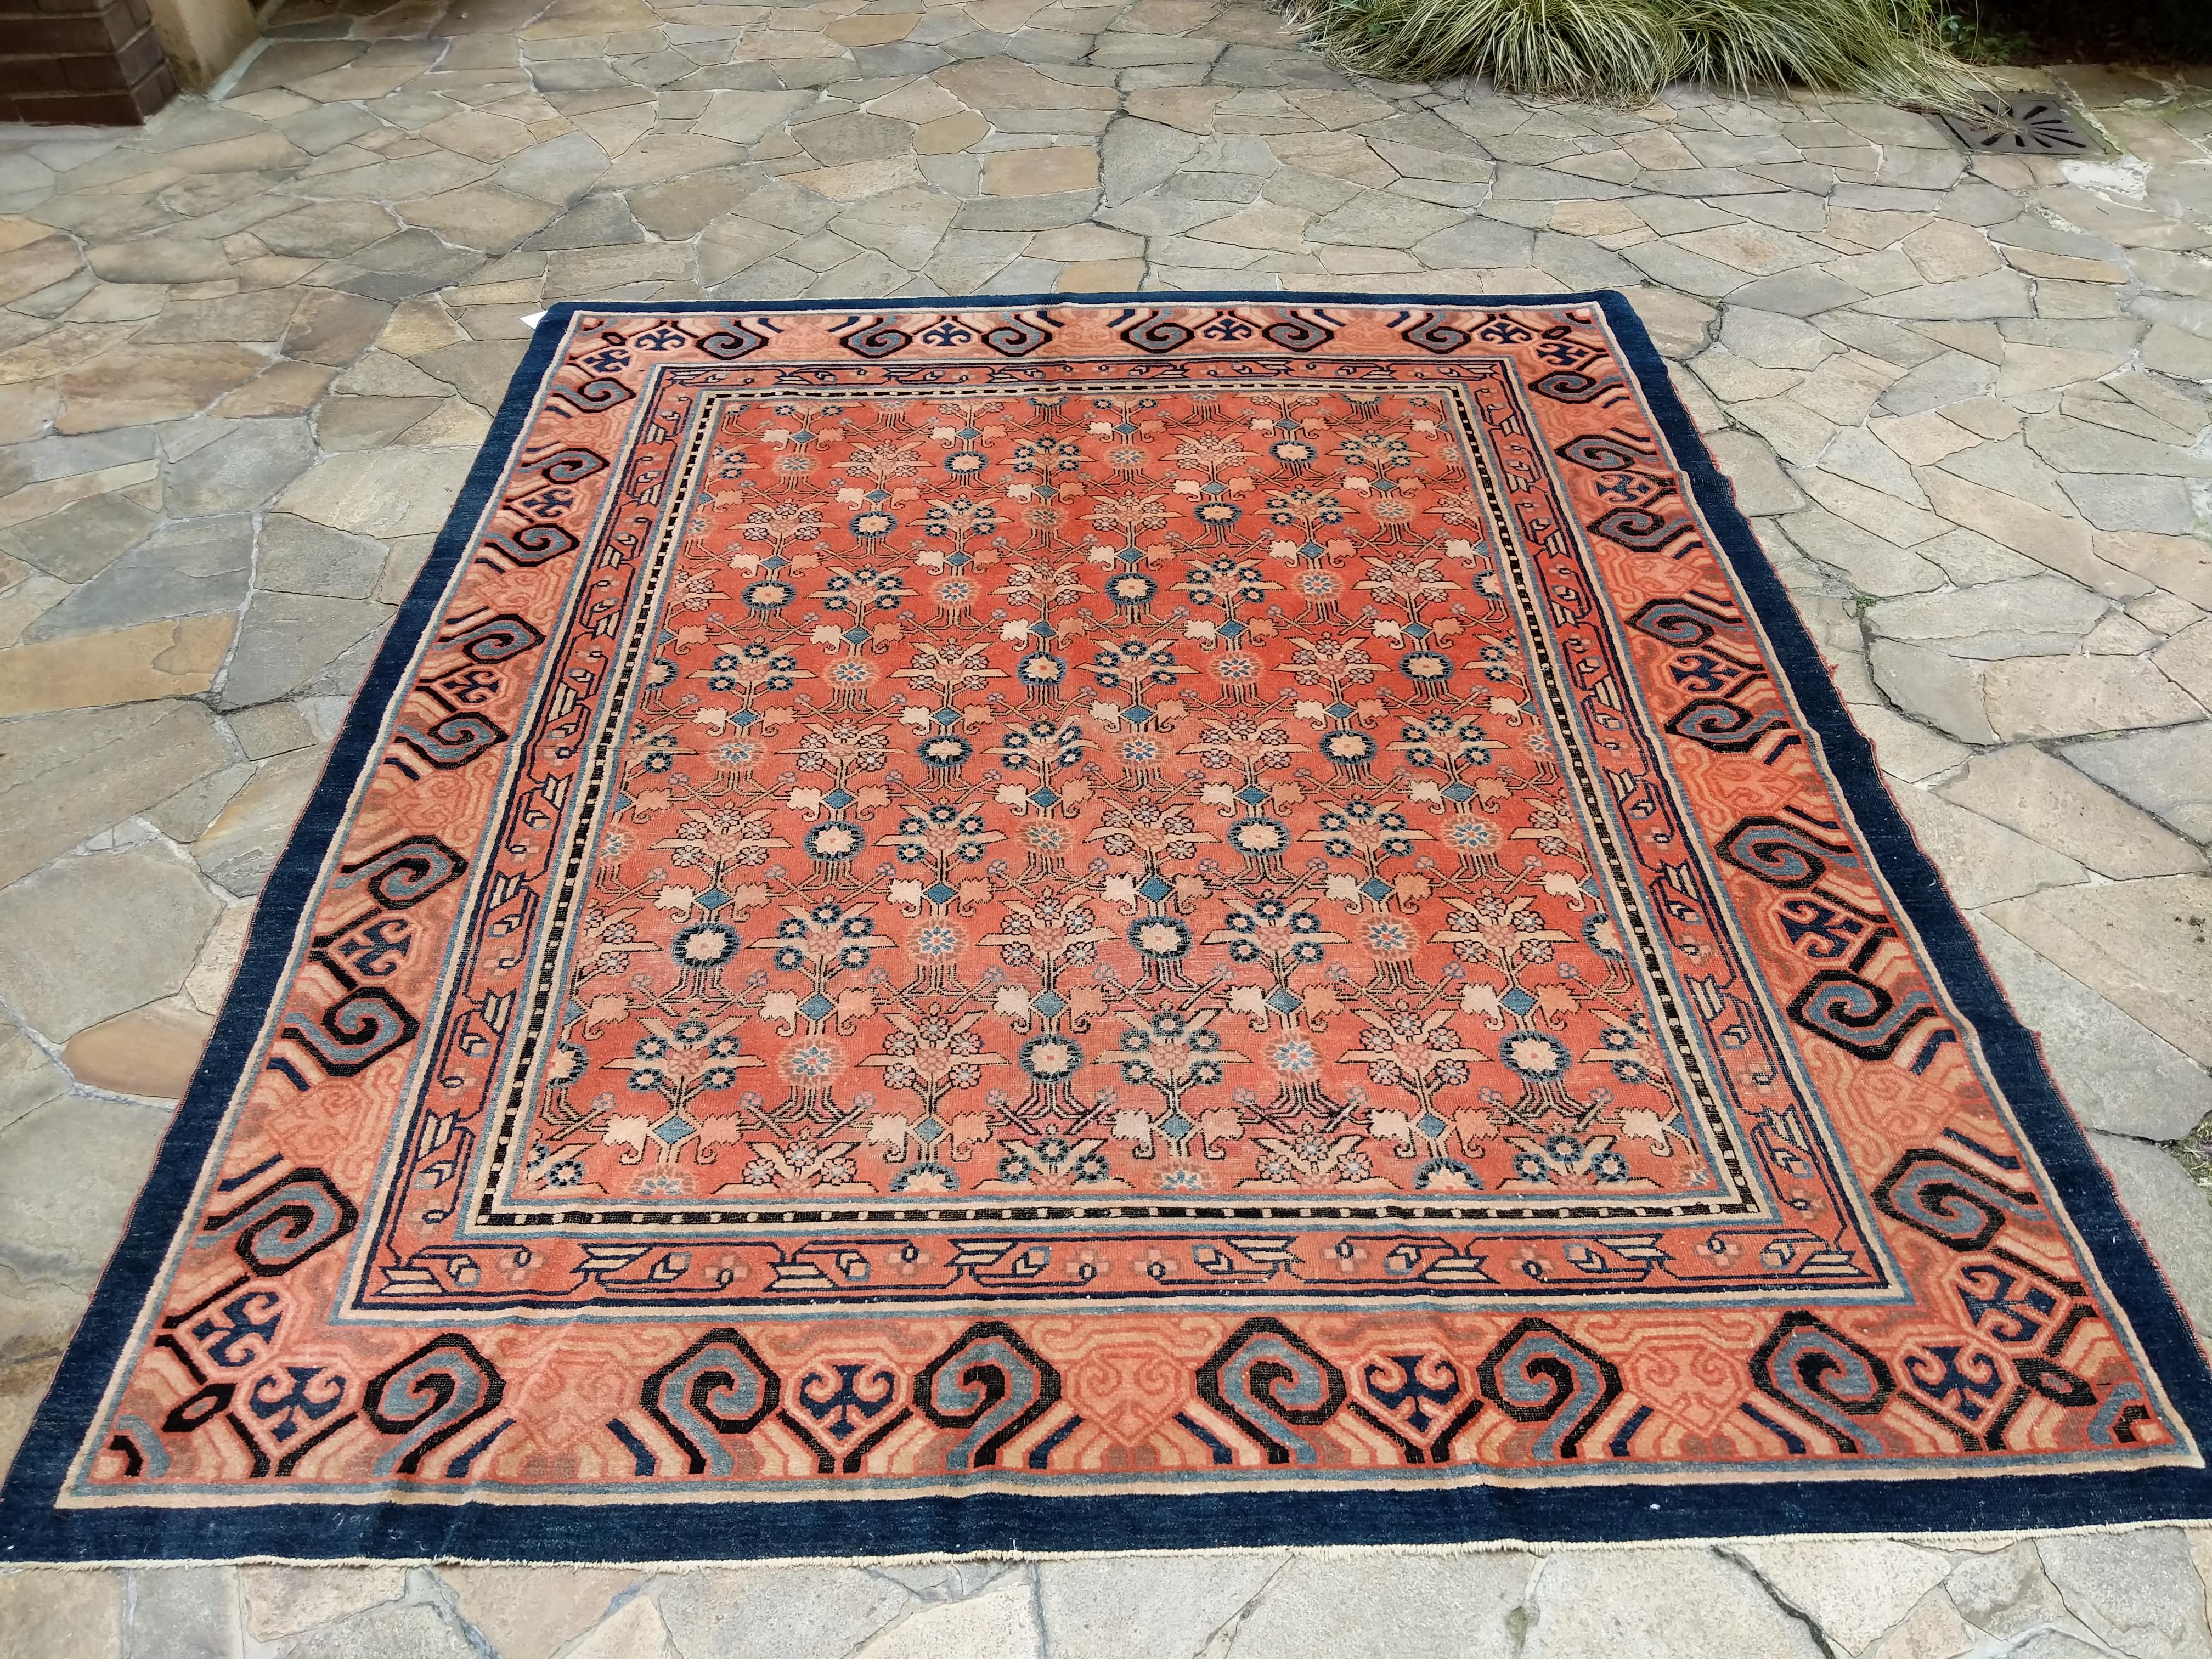 19th Century Rare and Unusual Antique Kashgar Rug with Mughal Pattern For Sale